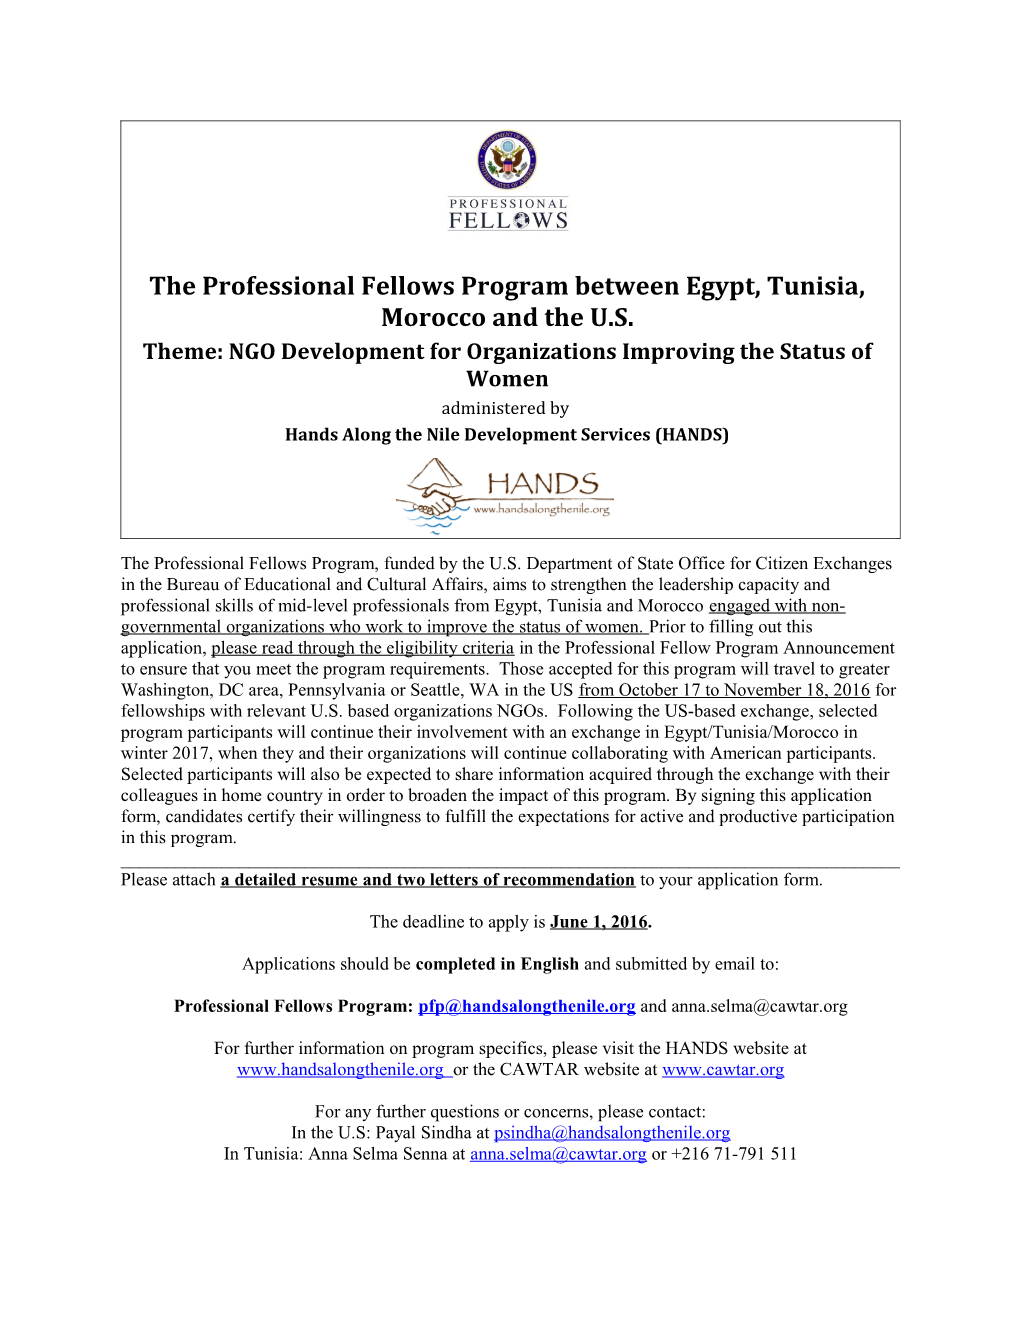 The Professional Fellows Program Between Egypt, Tunisia, Morocco and the U.S